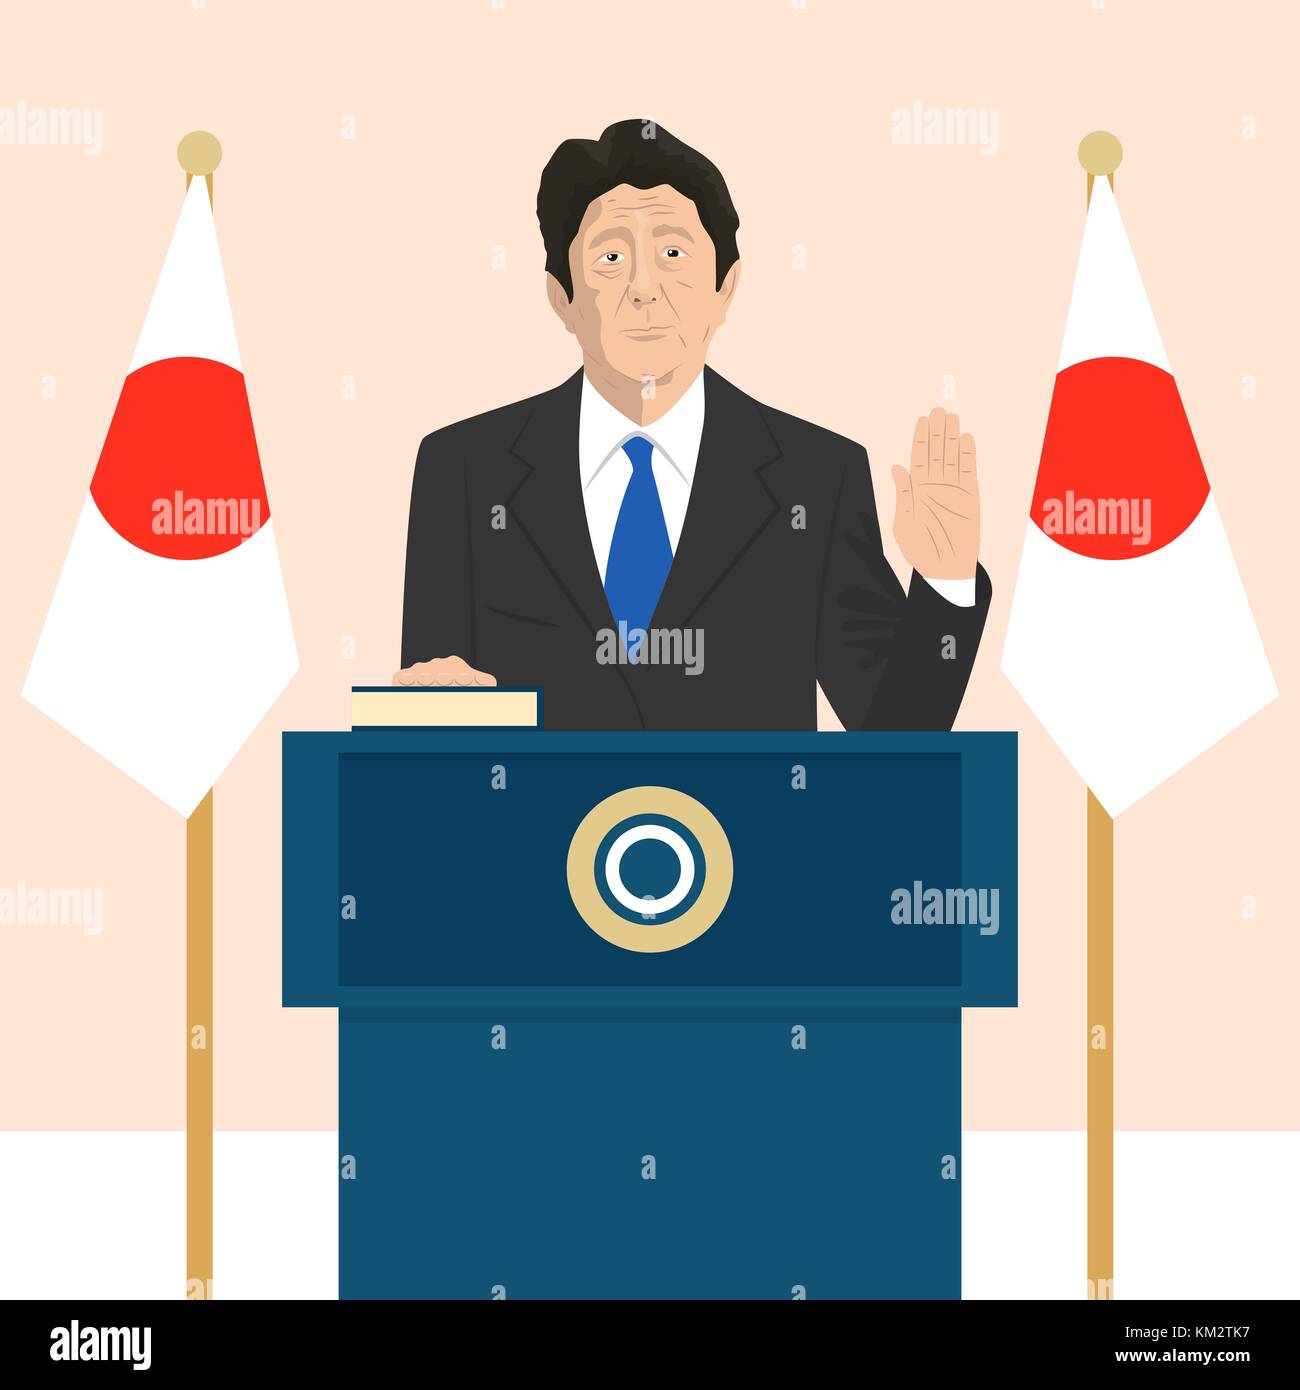 02.12.2017 Editorial illustration of the Prime Minister of Japan Shinzo Abe that is taking an oath on Japanese flag background. Stock Vector